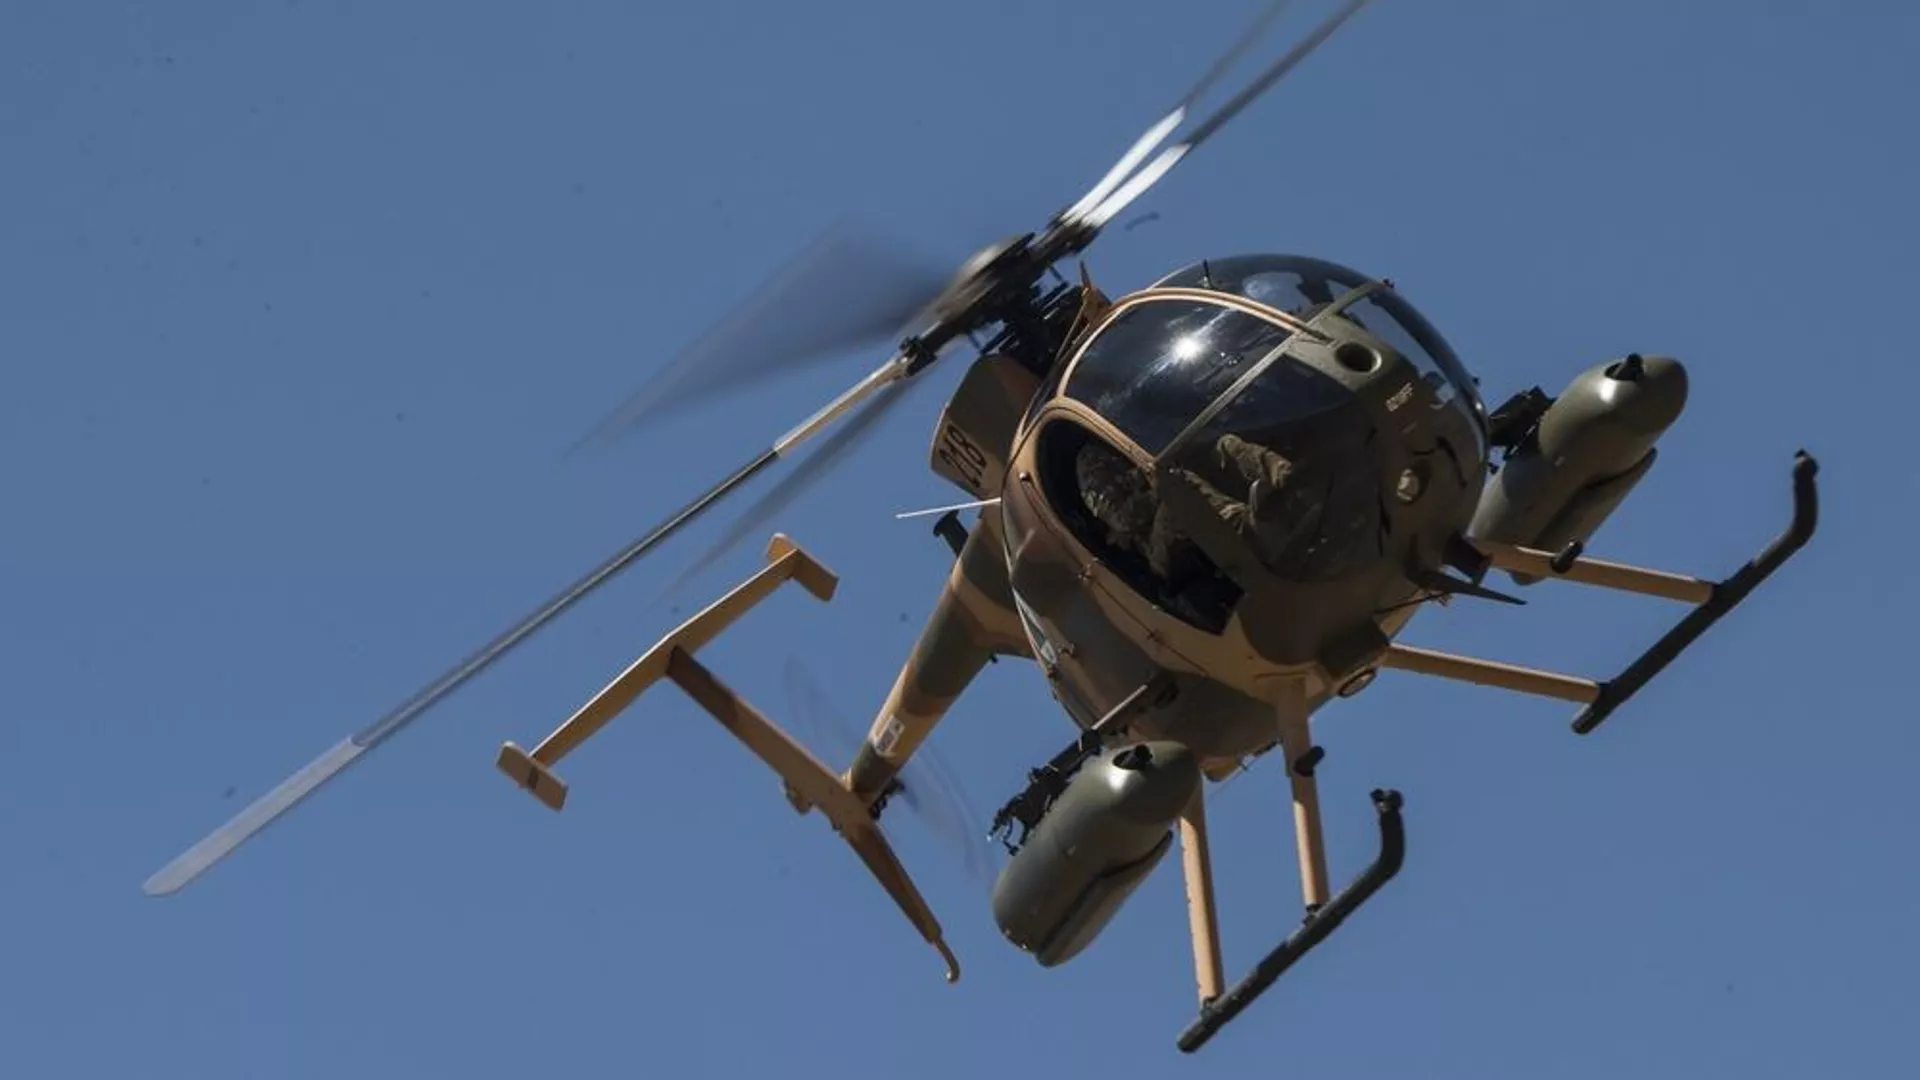 Tragic helicopter accident in Afghanistan leaves two dead in Taliban ranks